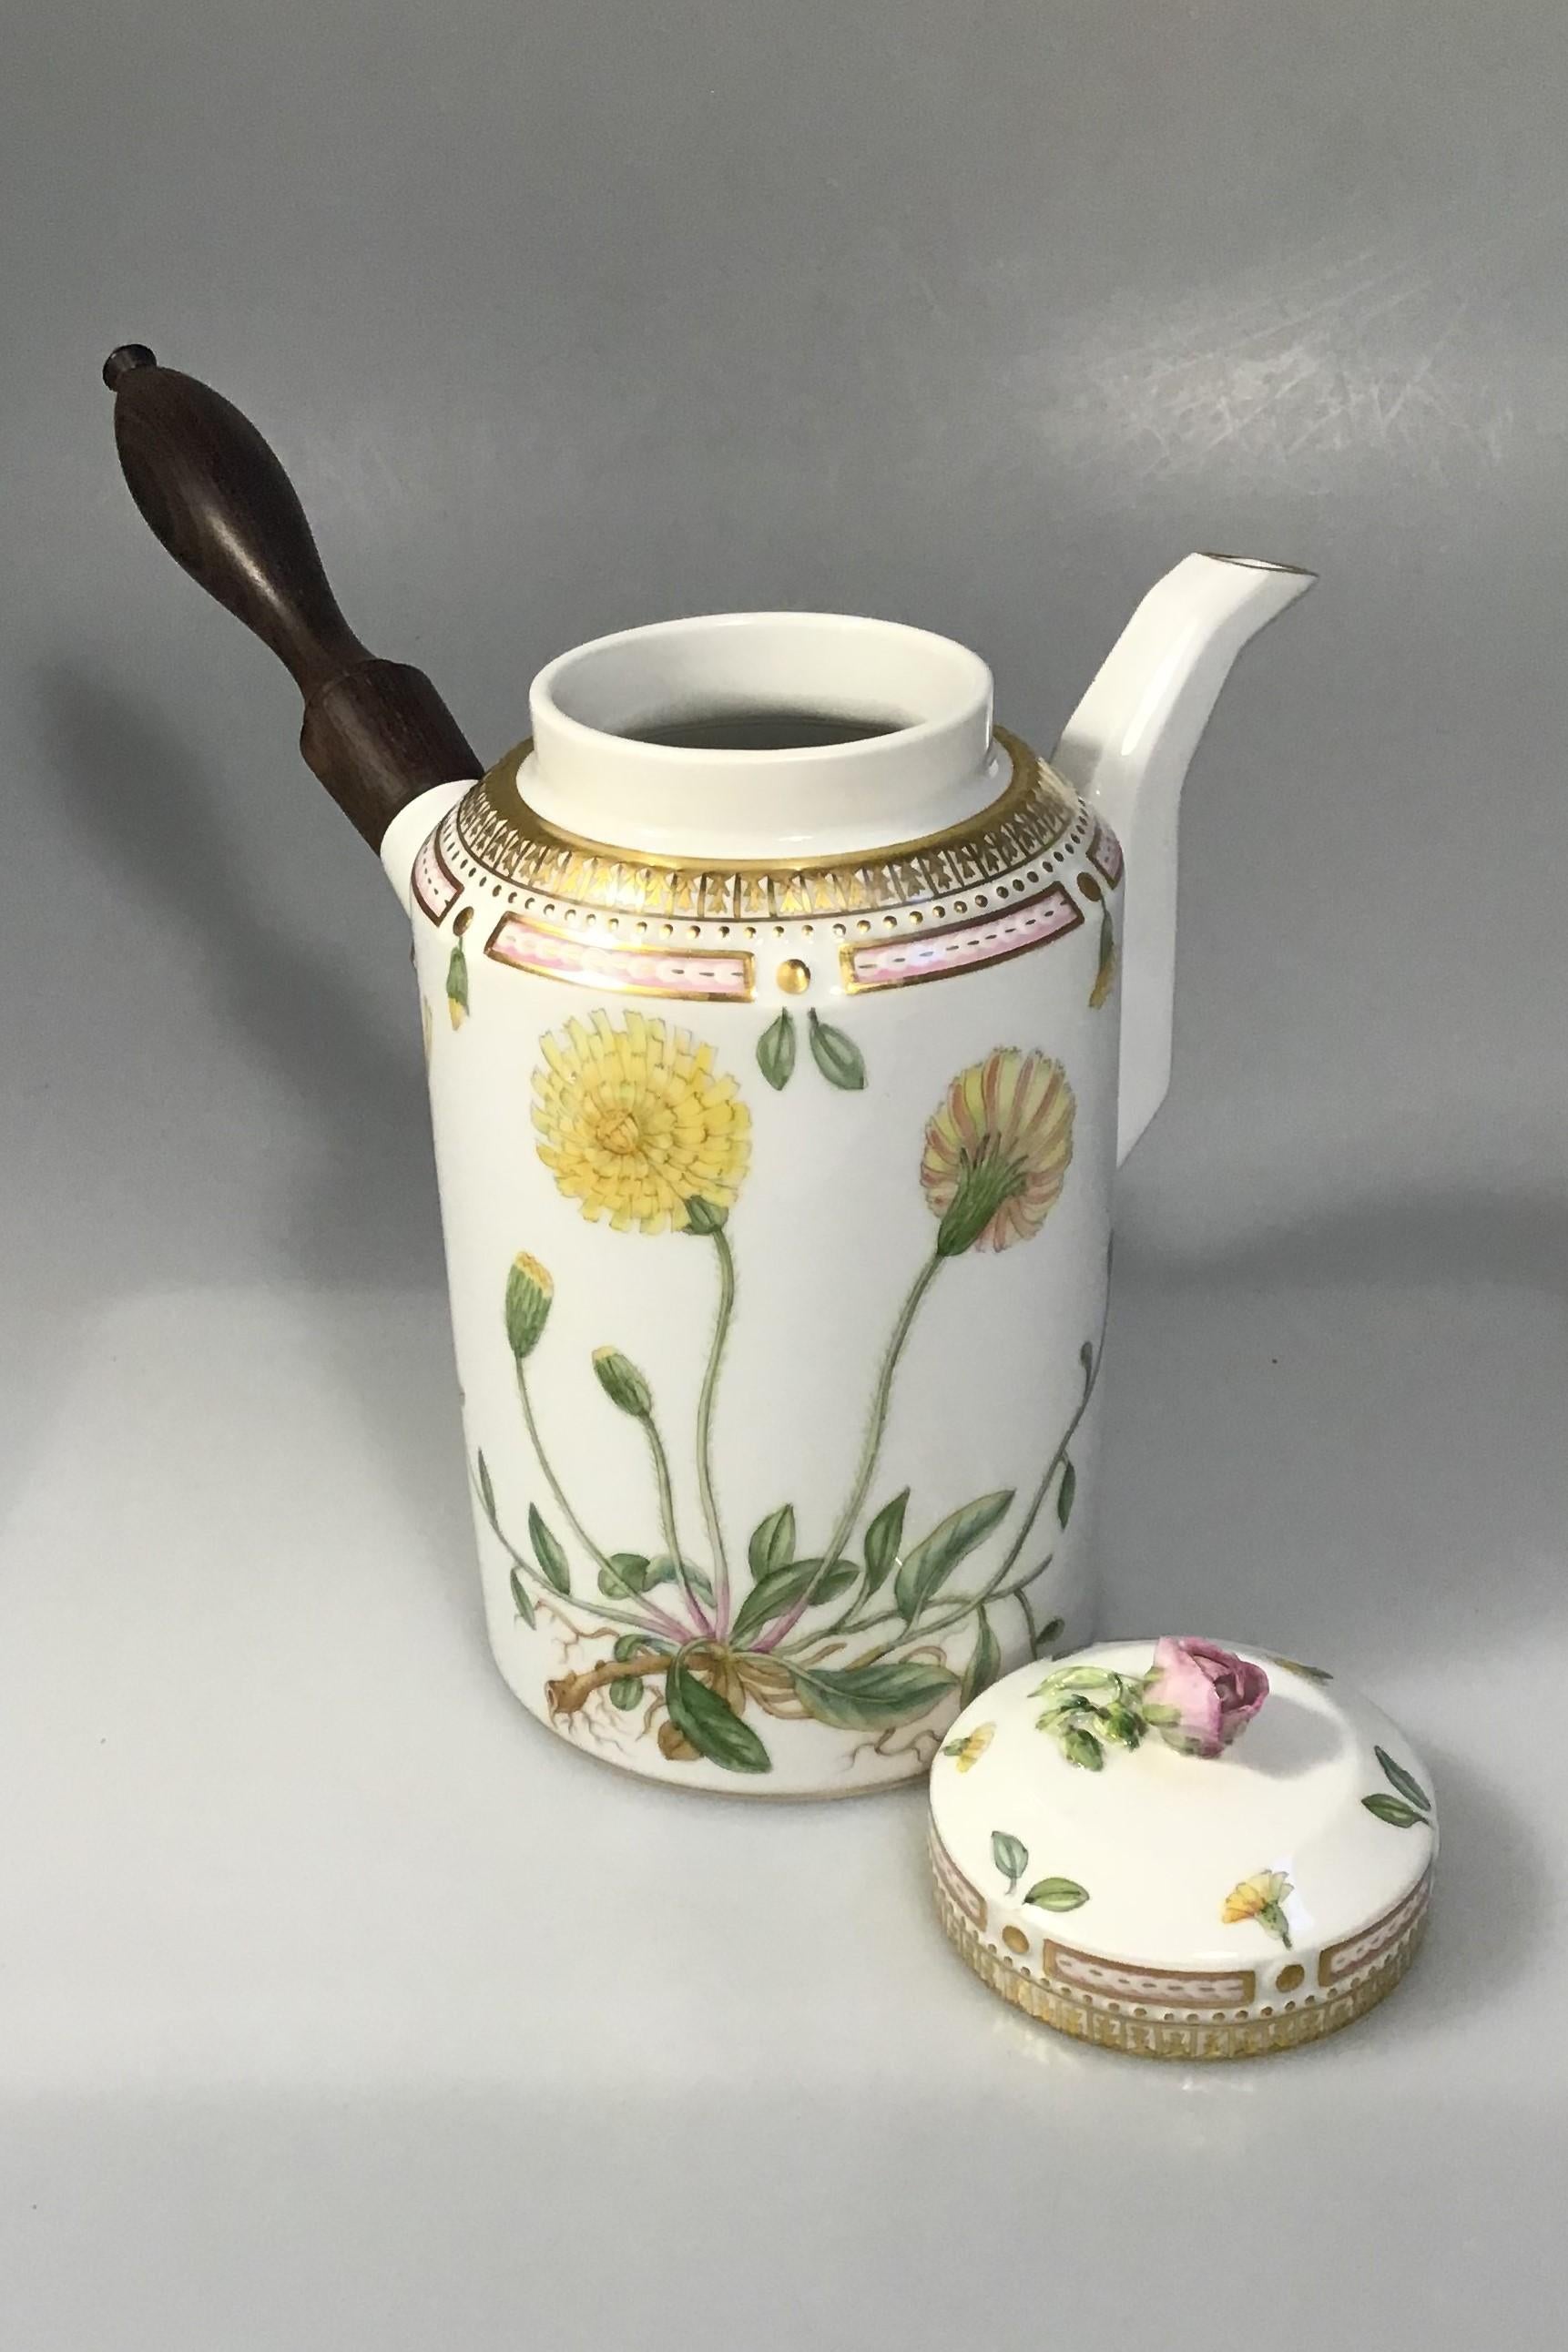 Royal Copenhagen Flora Danica coffee pot no 128 (3620) 

Latin name: Hieracium Pilosella L(Mouse-ear hawkweed)
1st quality holds 6 cups wooden handle 
Measures: H 17.5 cm (6 57/64 in).